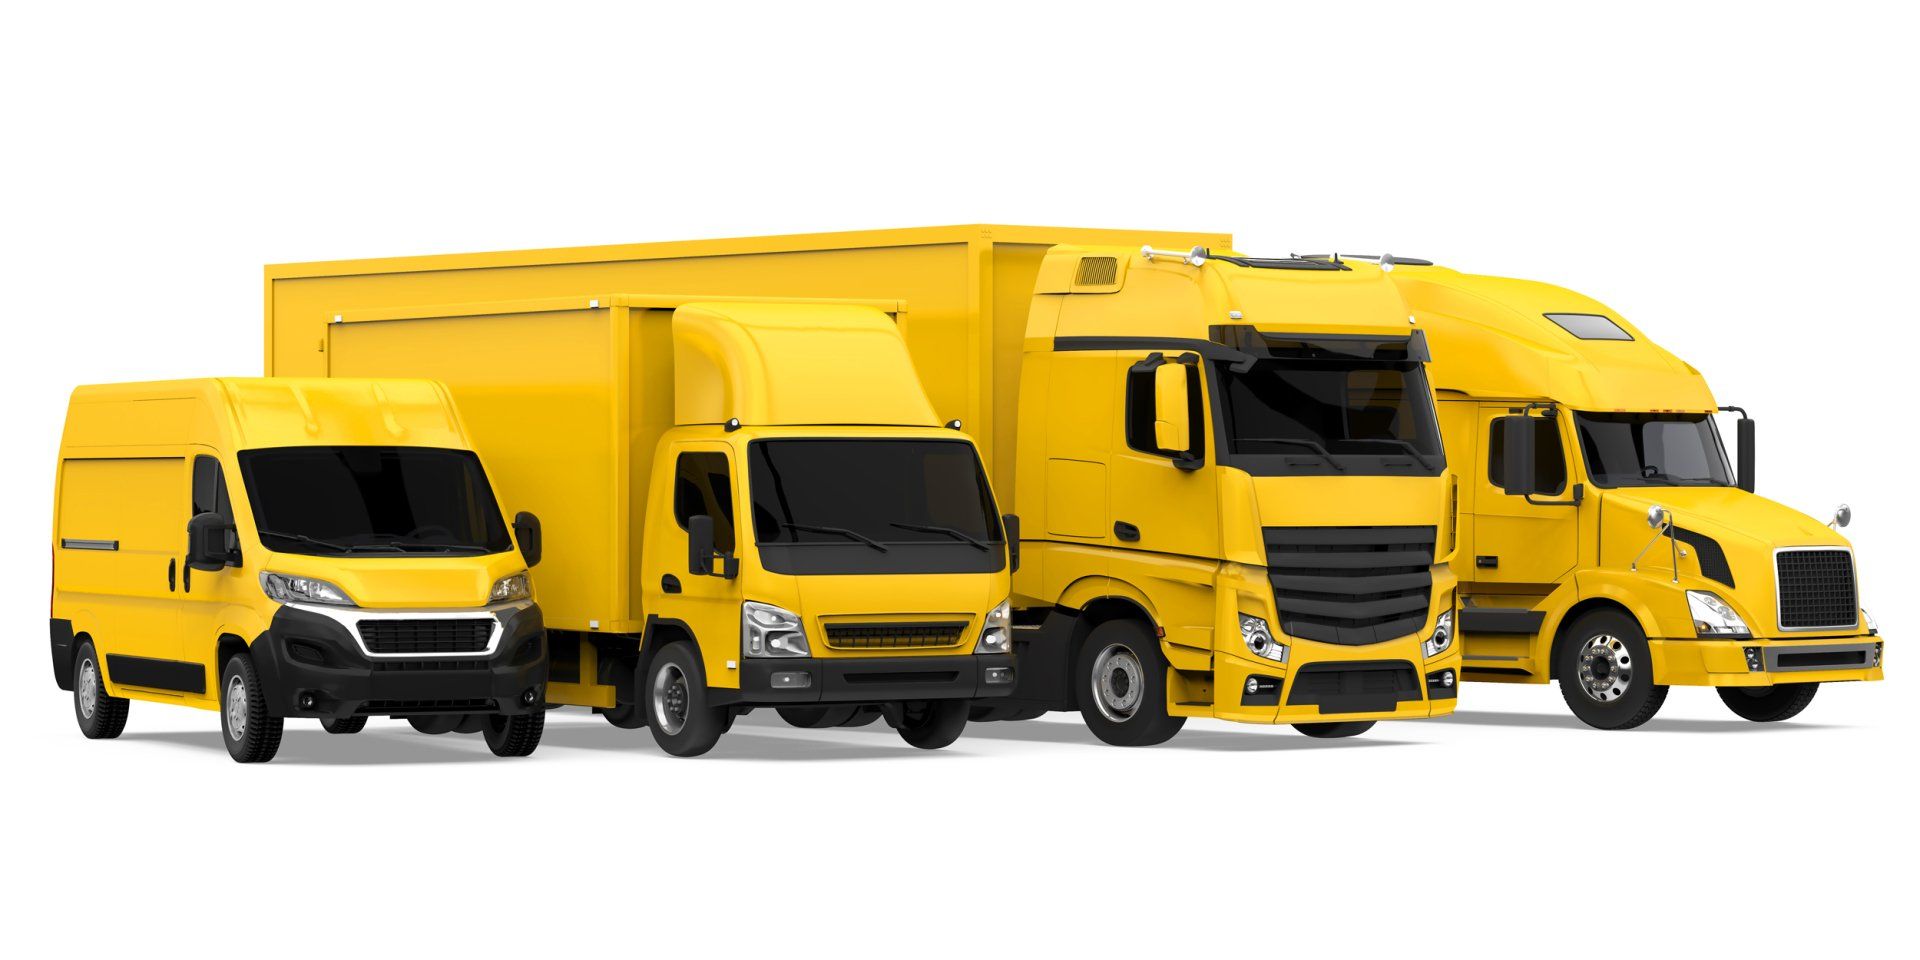 A group of yellow trucks and vans are parked next to each other on a white background.